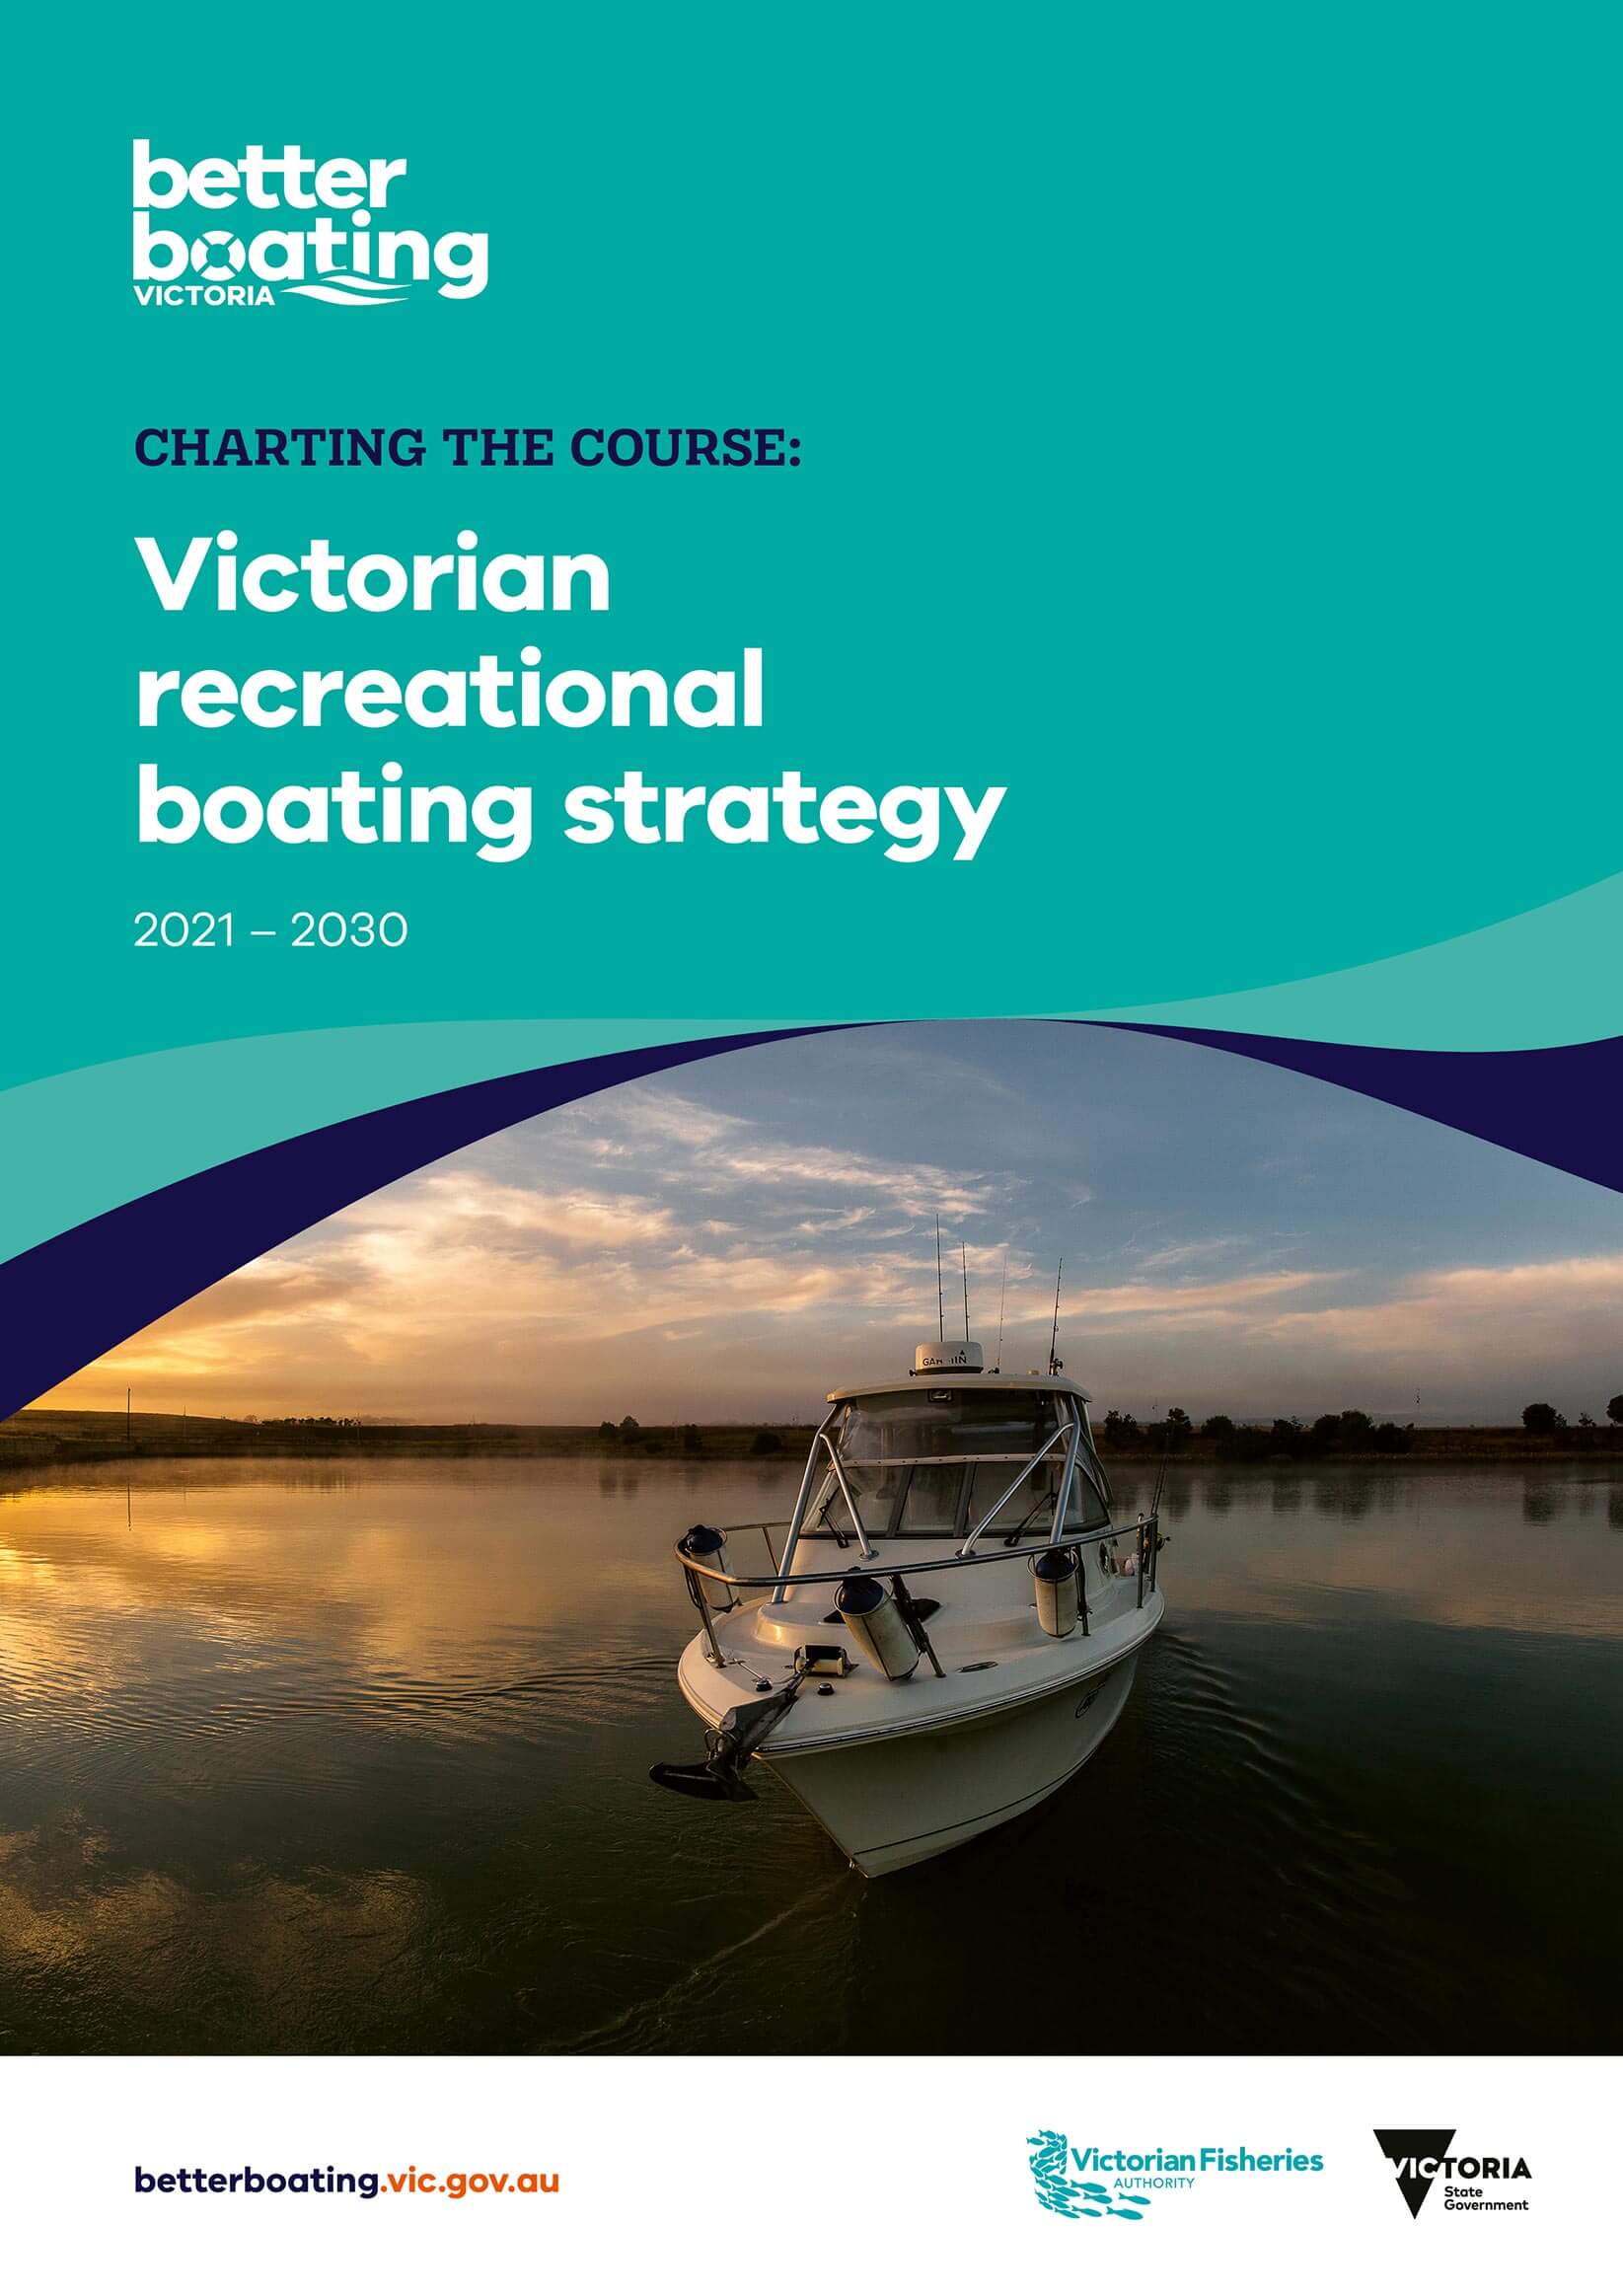 7185-DOTBB-Victoria-Recreational-Boating-Strategy-FINALISATION-COVER-1.0-1.jpg